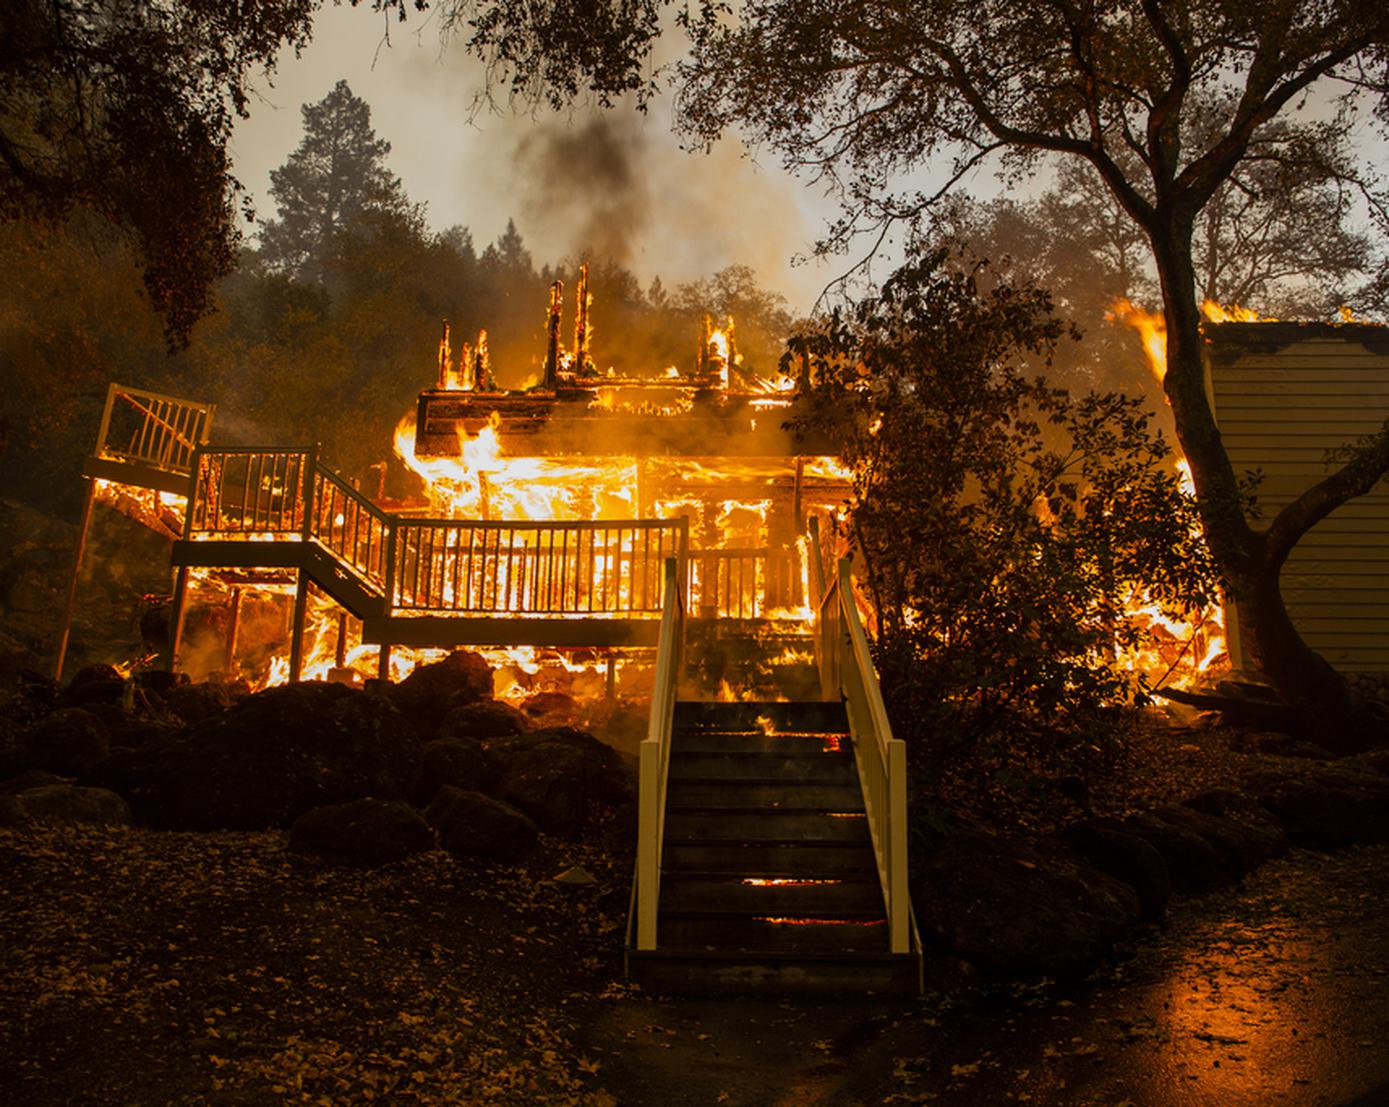 How fancy new resorts in Napa’s Wine Country increases fire risk